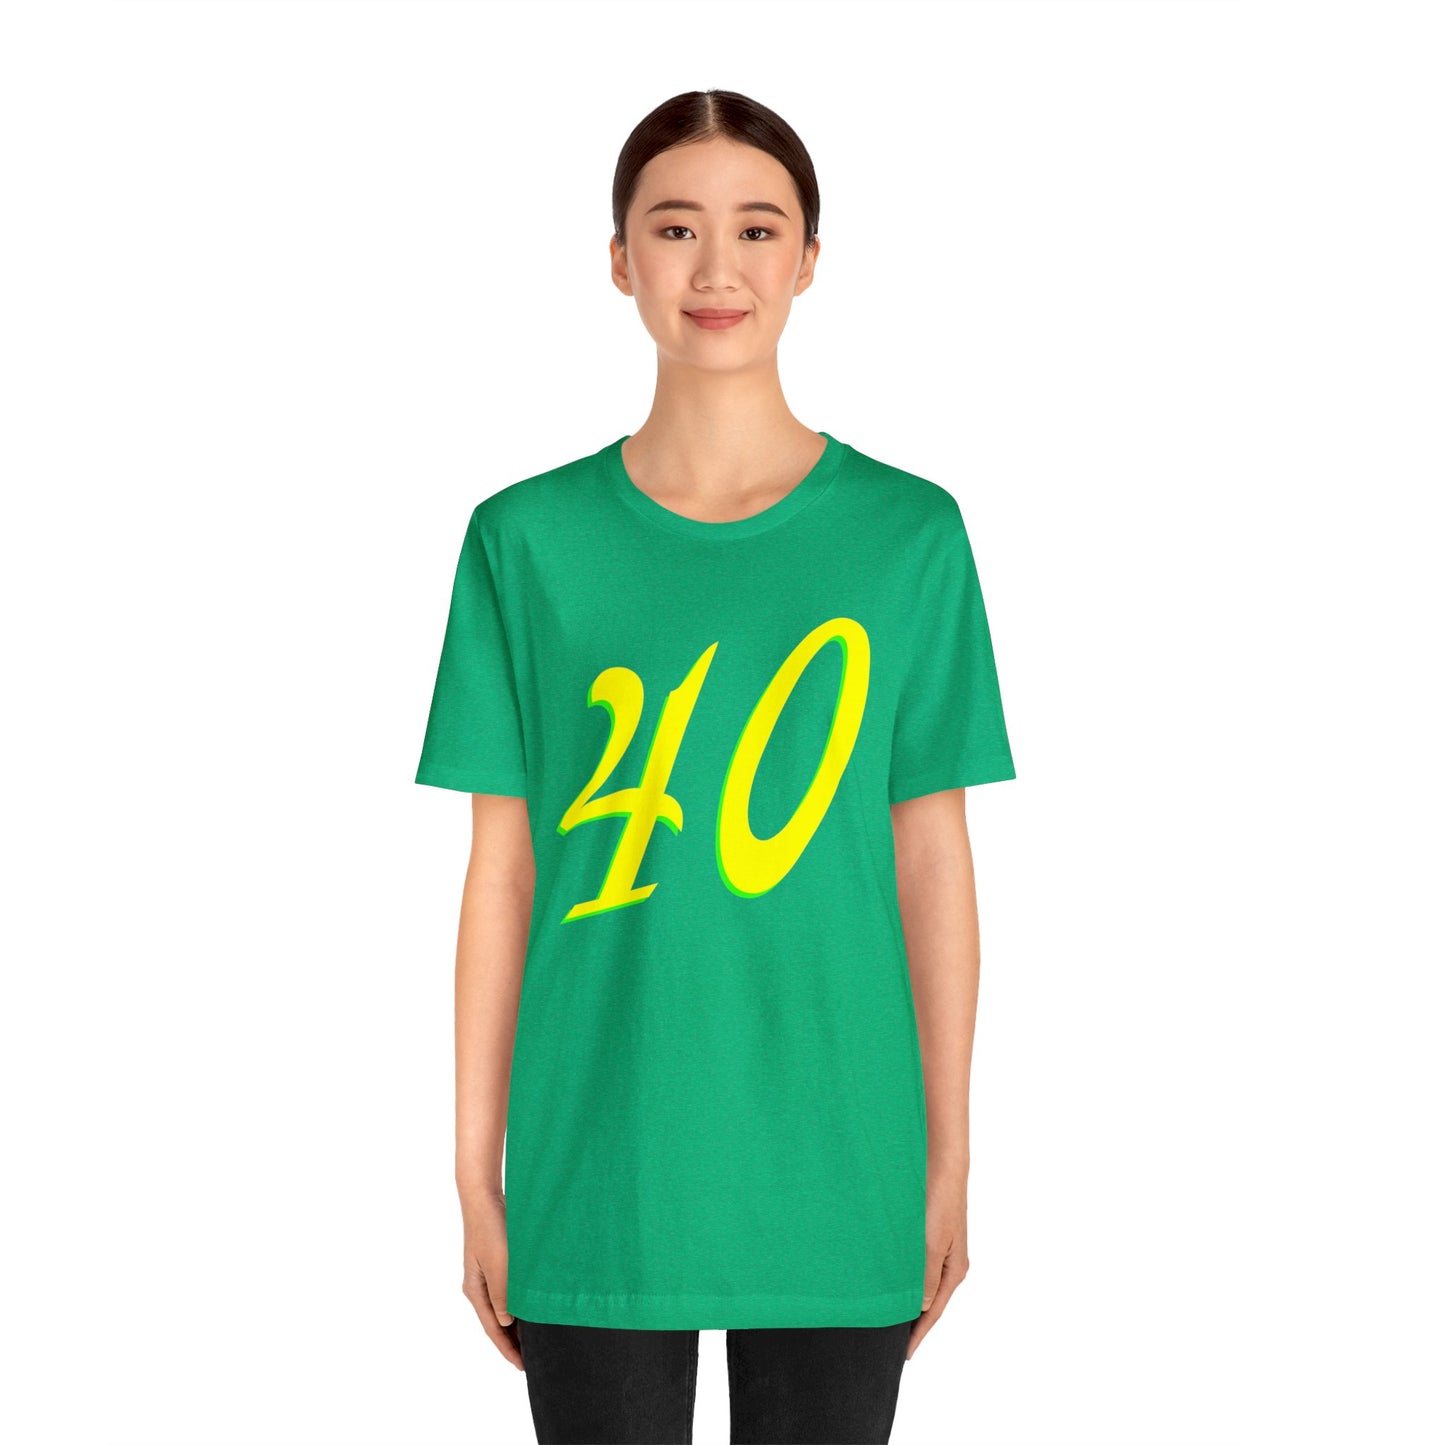 Number 40 Design - Soft Cotton Tee for birthdays and celebrations, Gift for friends and family, Multiple Options by clothezy.com in Asphalt Size Medium - Buy Now